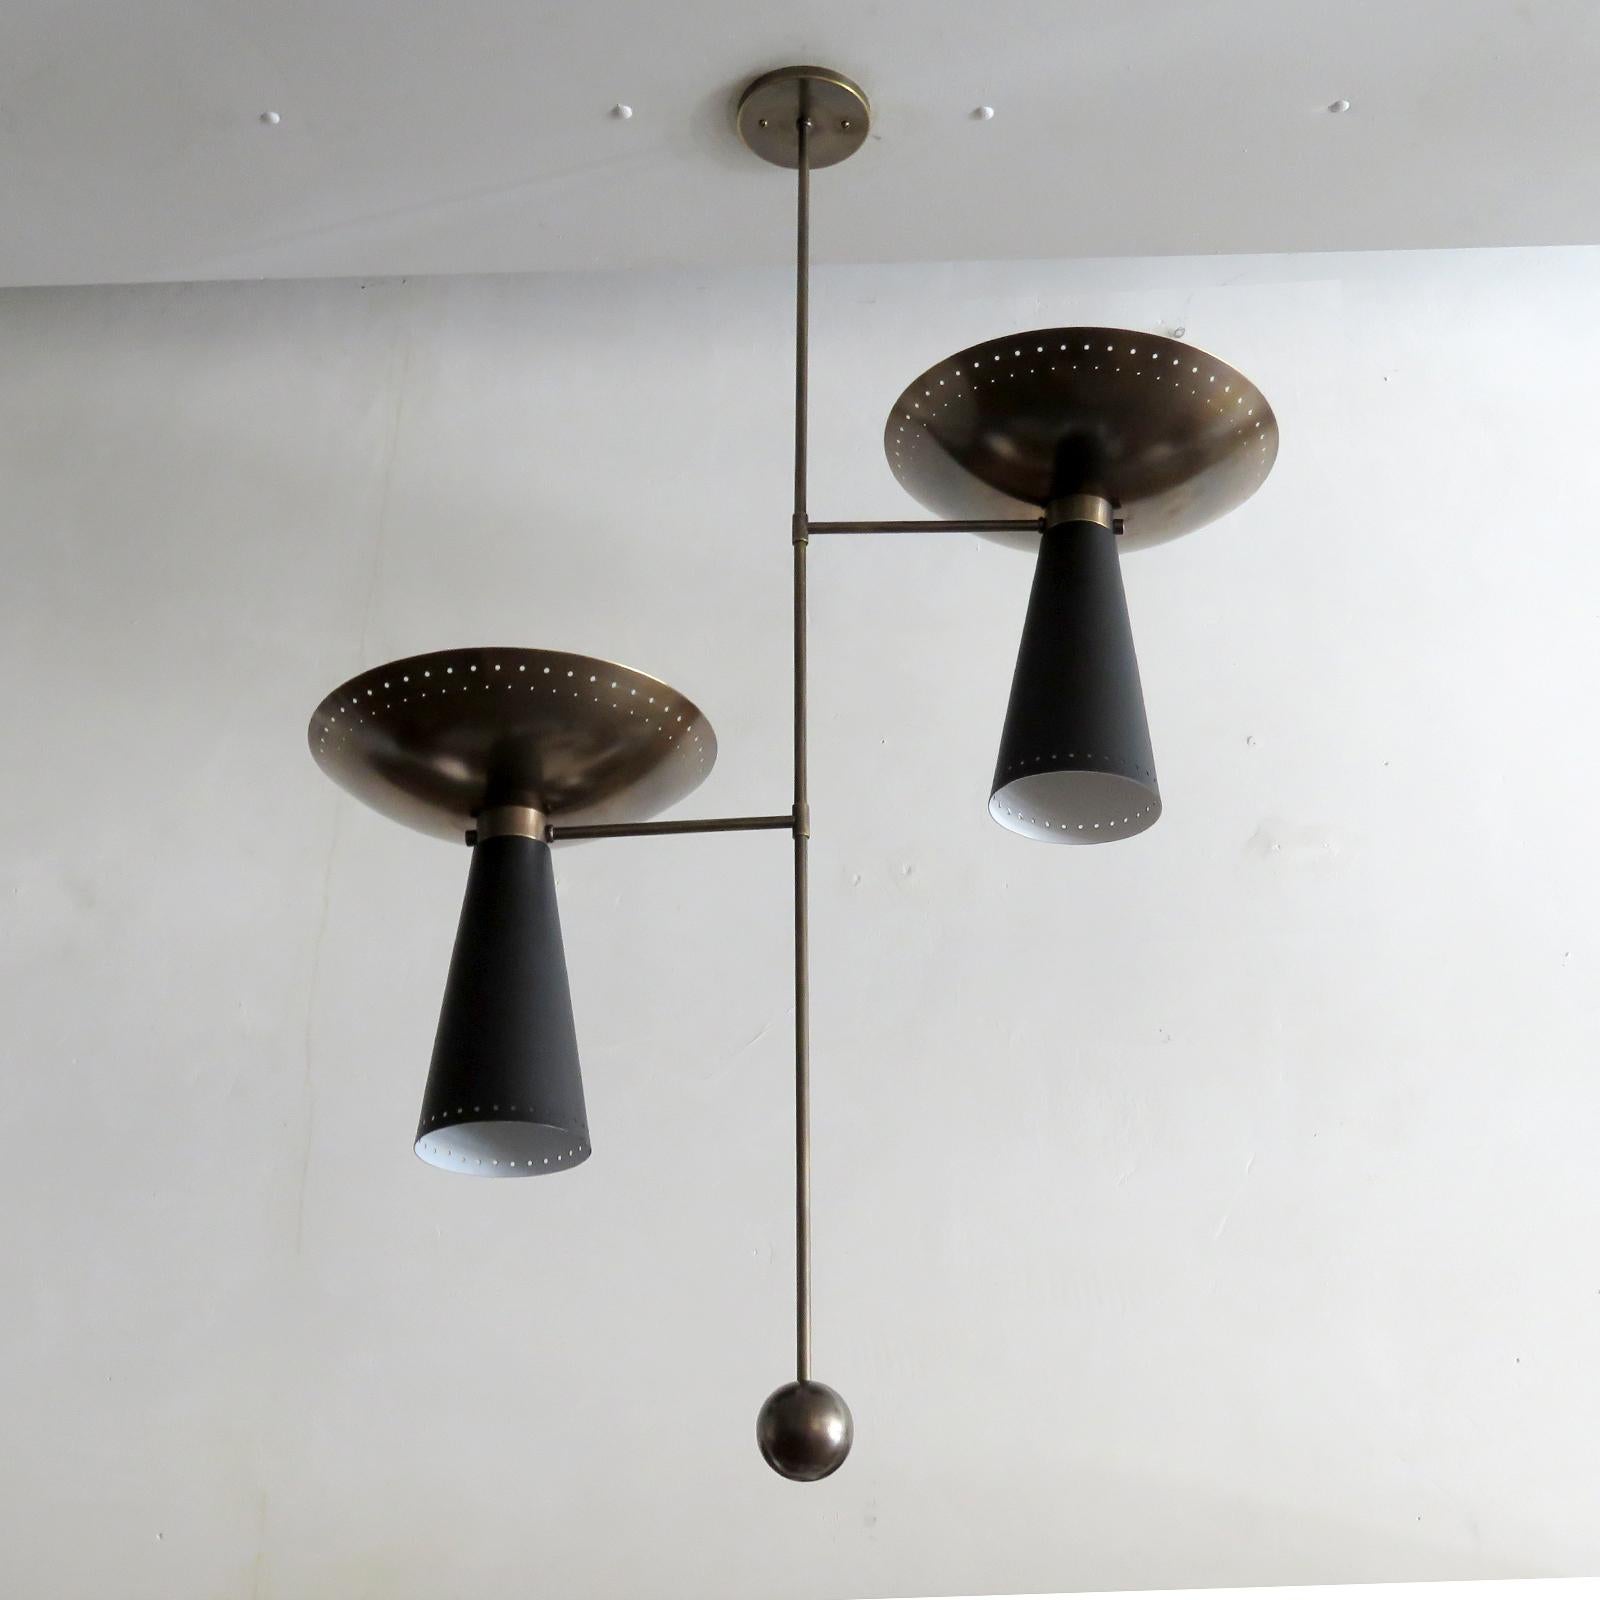 Elegant Calice II pendant light designed by Gallery L7, handcrafted and finished in Los Angeles from American brass, with two aged brass up-lights and two black enameled down-lights. Perforations along the rims and solid brass ball detail. Two E26